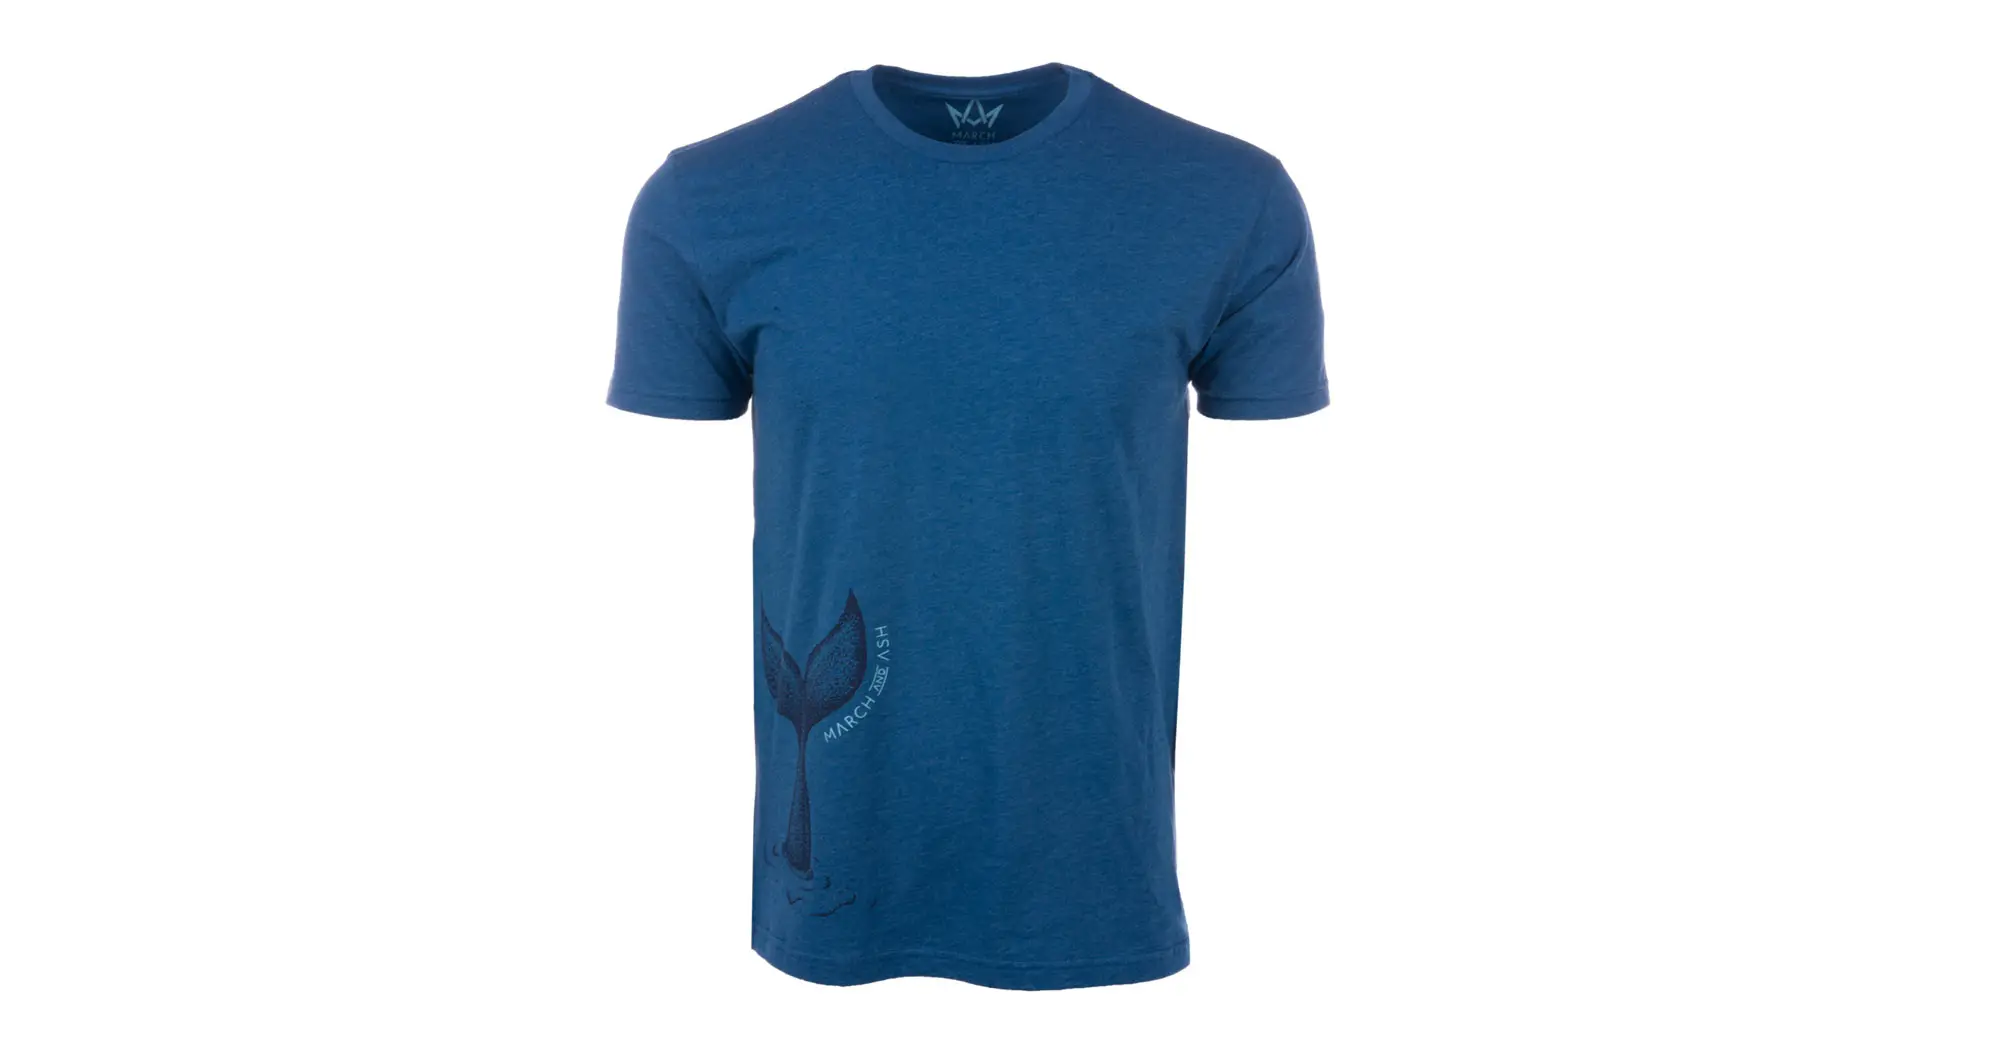 Unisex Whale Tail Tee